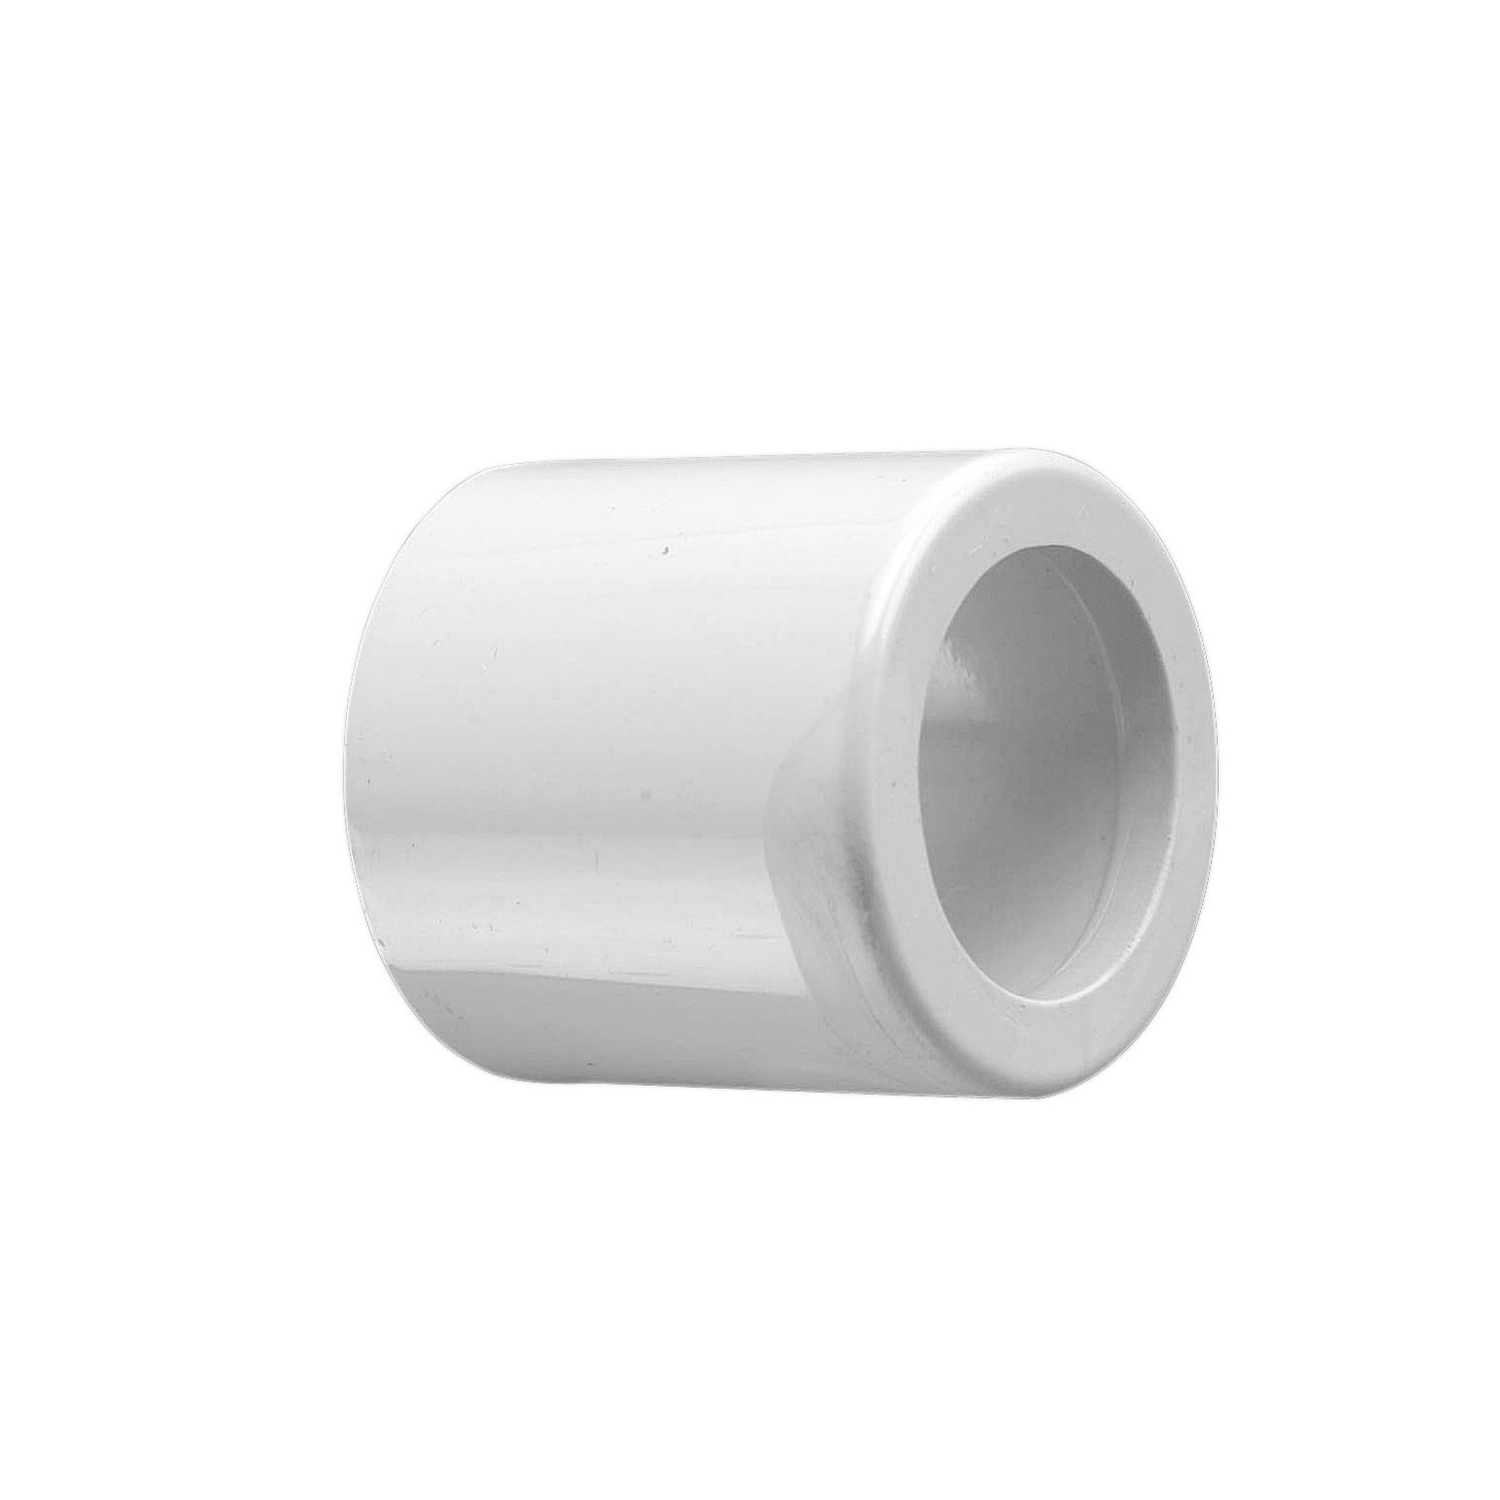 Solid Fittings - PVC, Plain Reducers, 32mm - 25mm, Grey